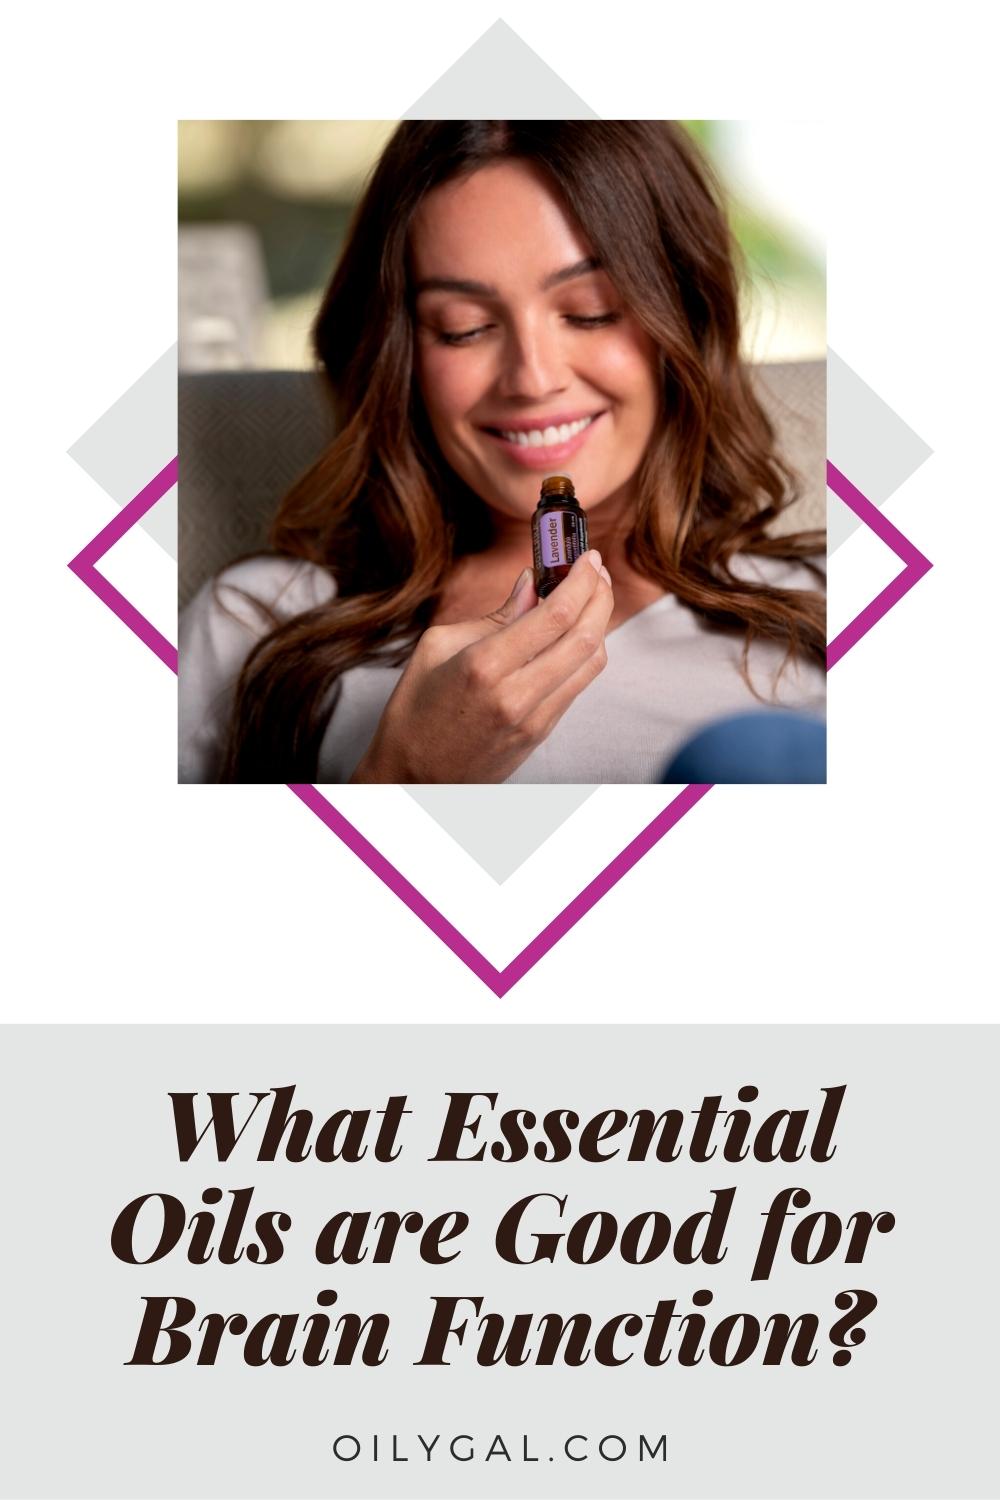 What Essential Oils are Good for Brain Function